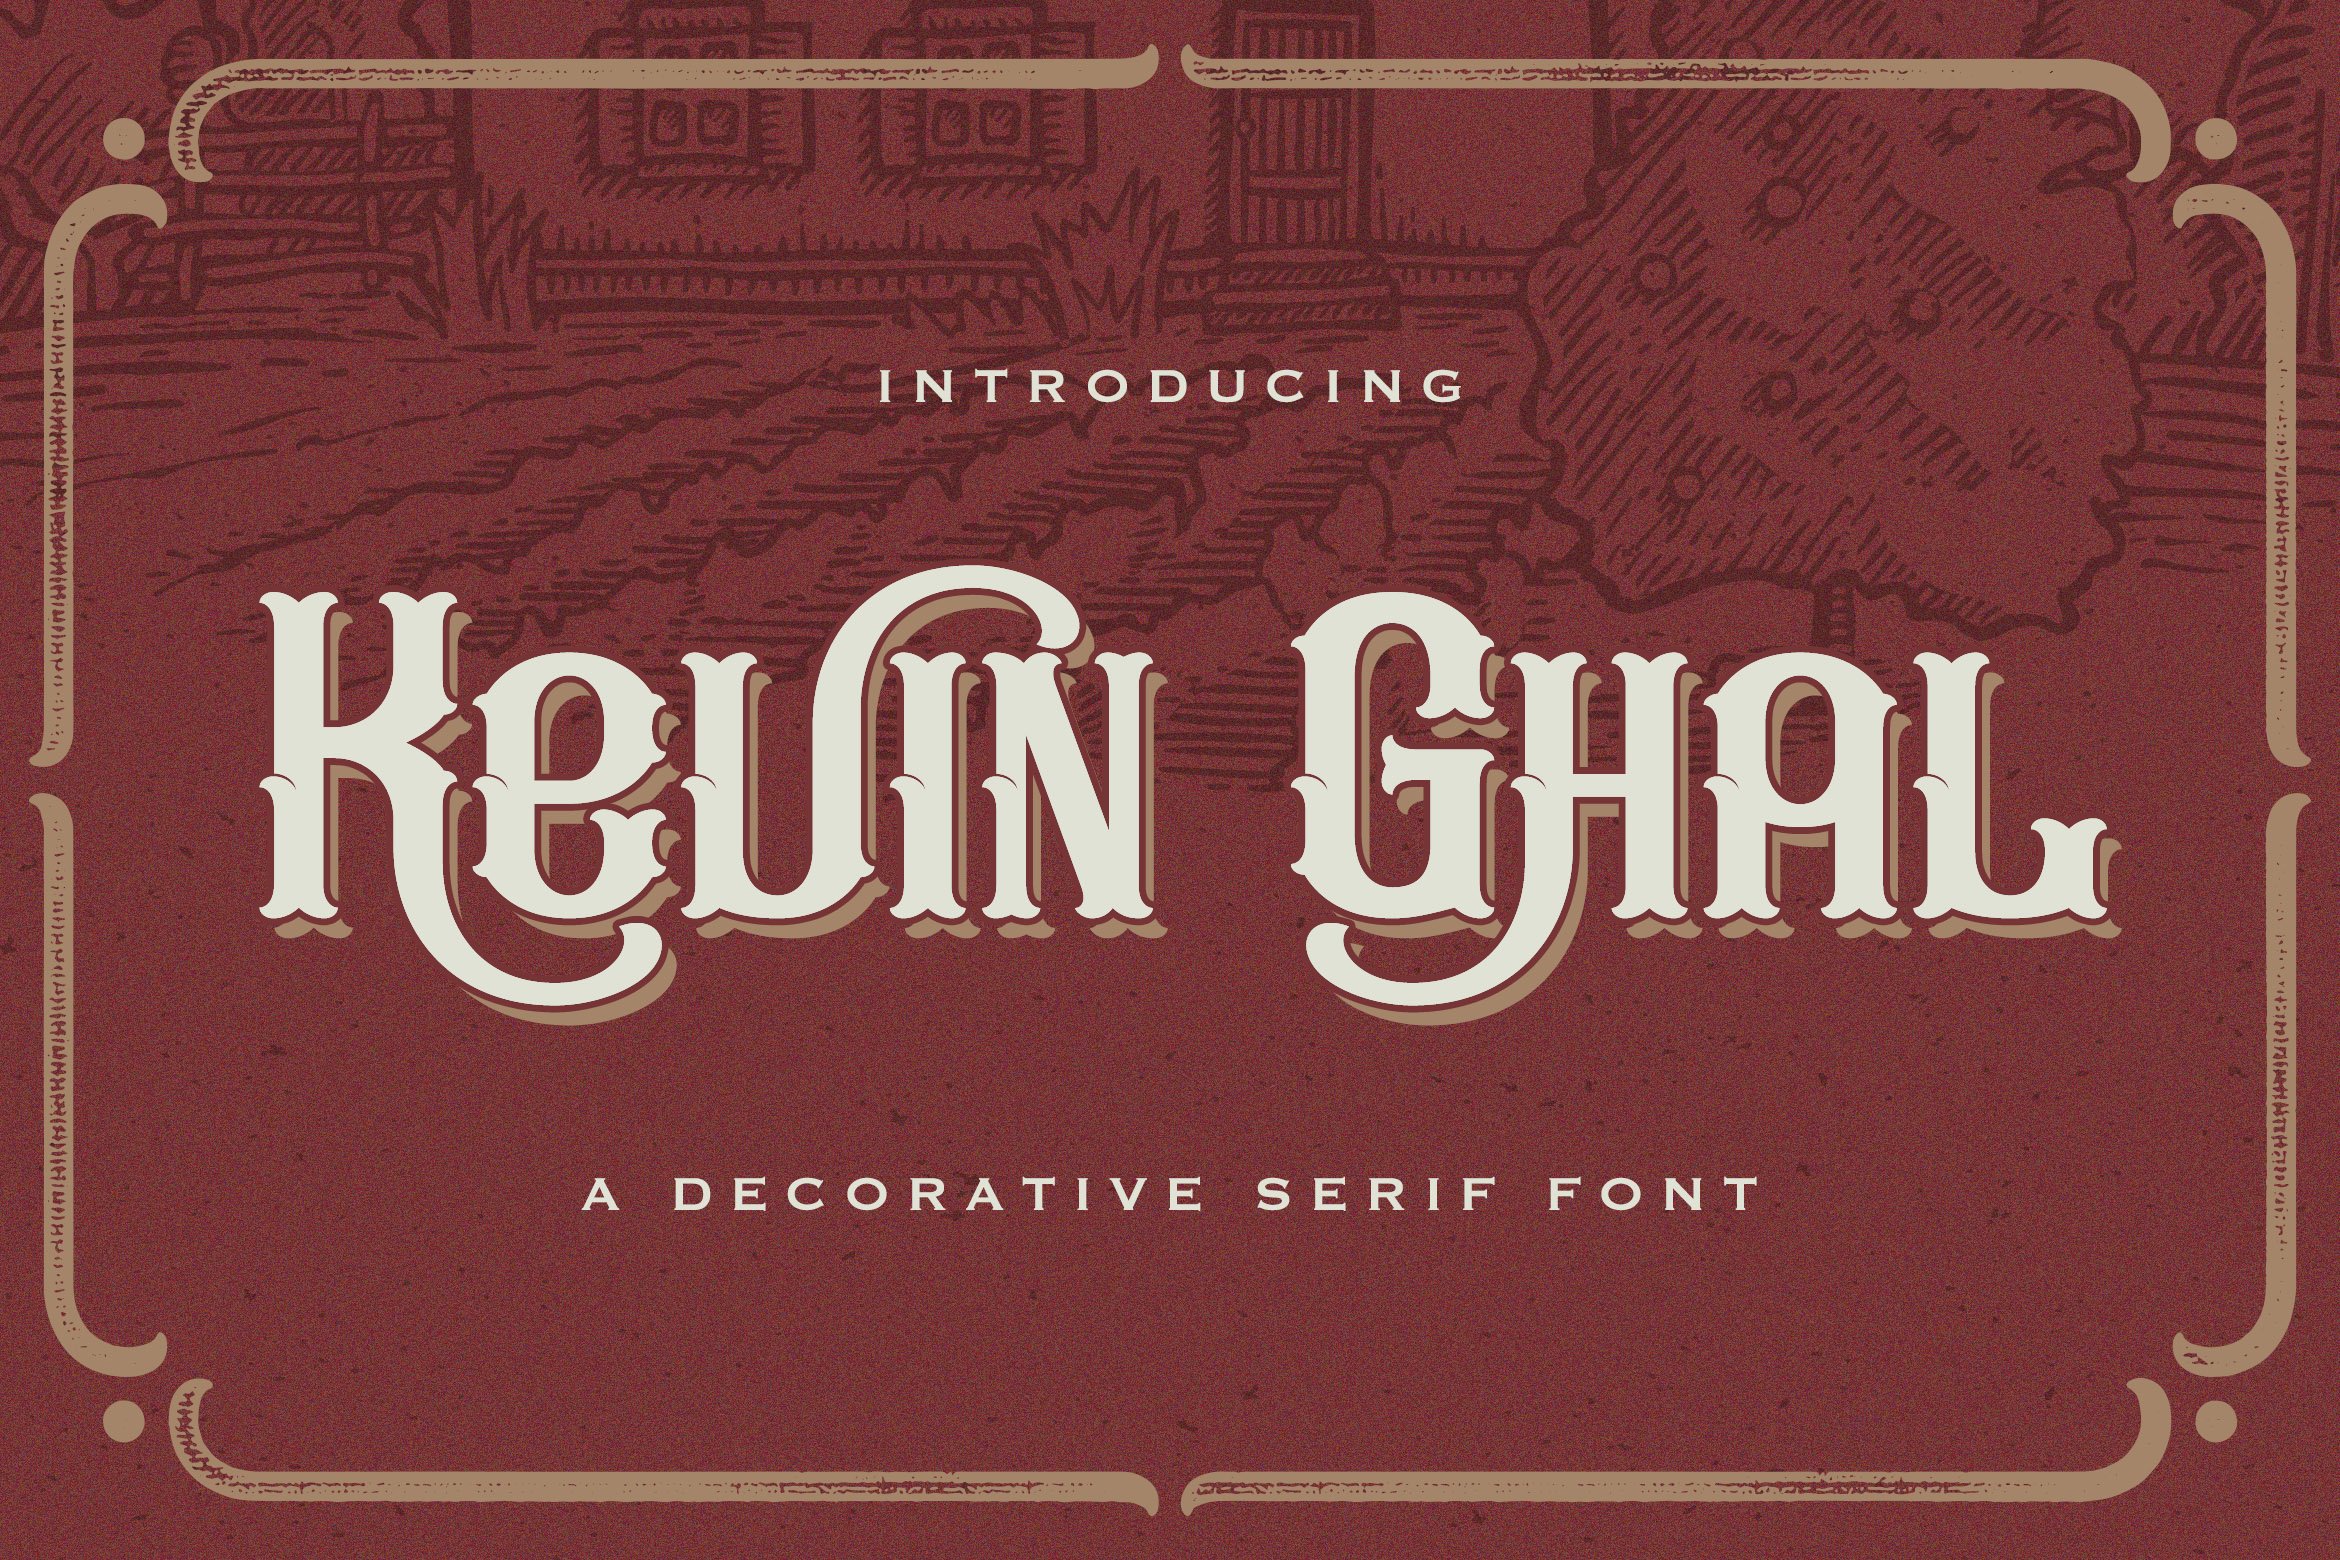 Kevin Ghal - Victorian Style Font cover image.